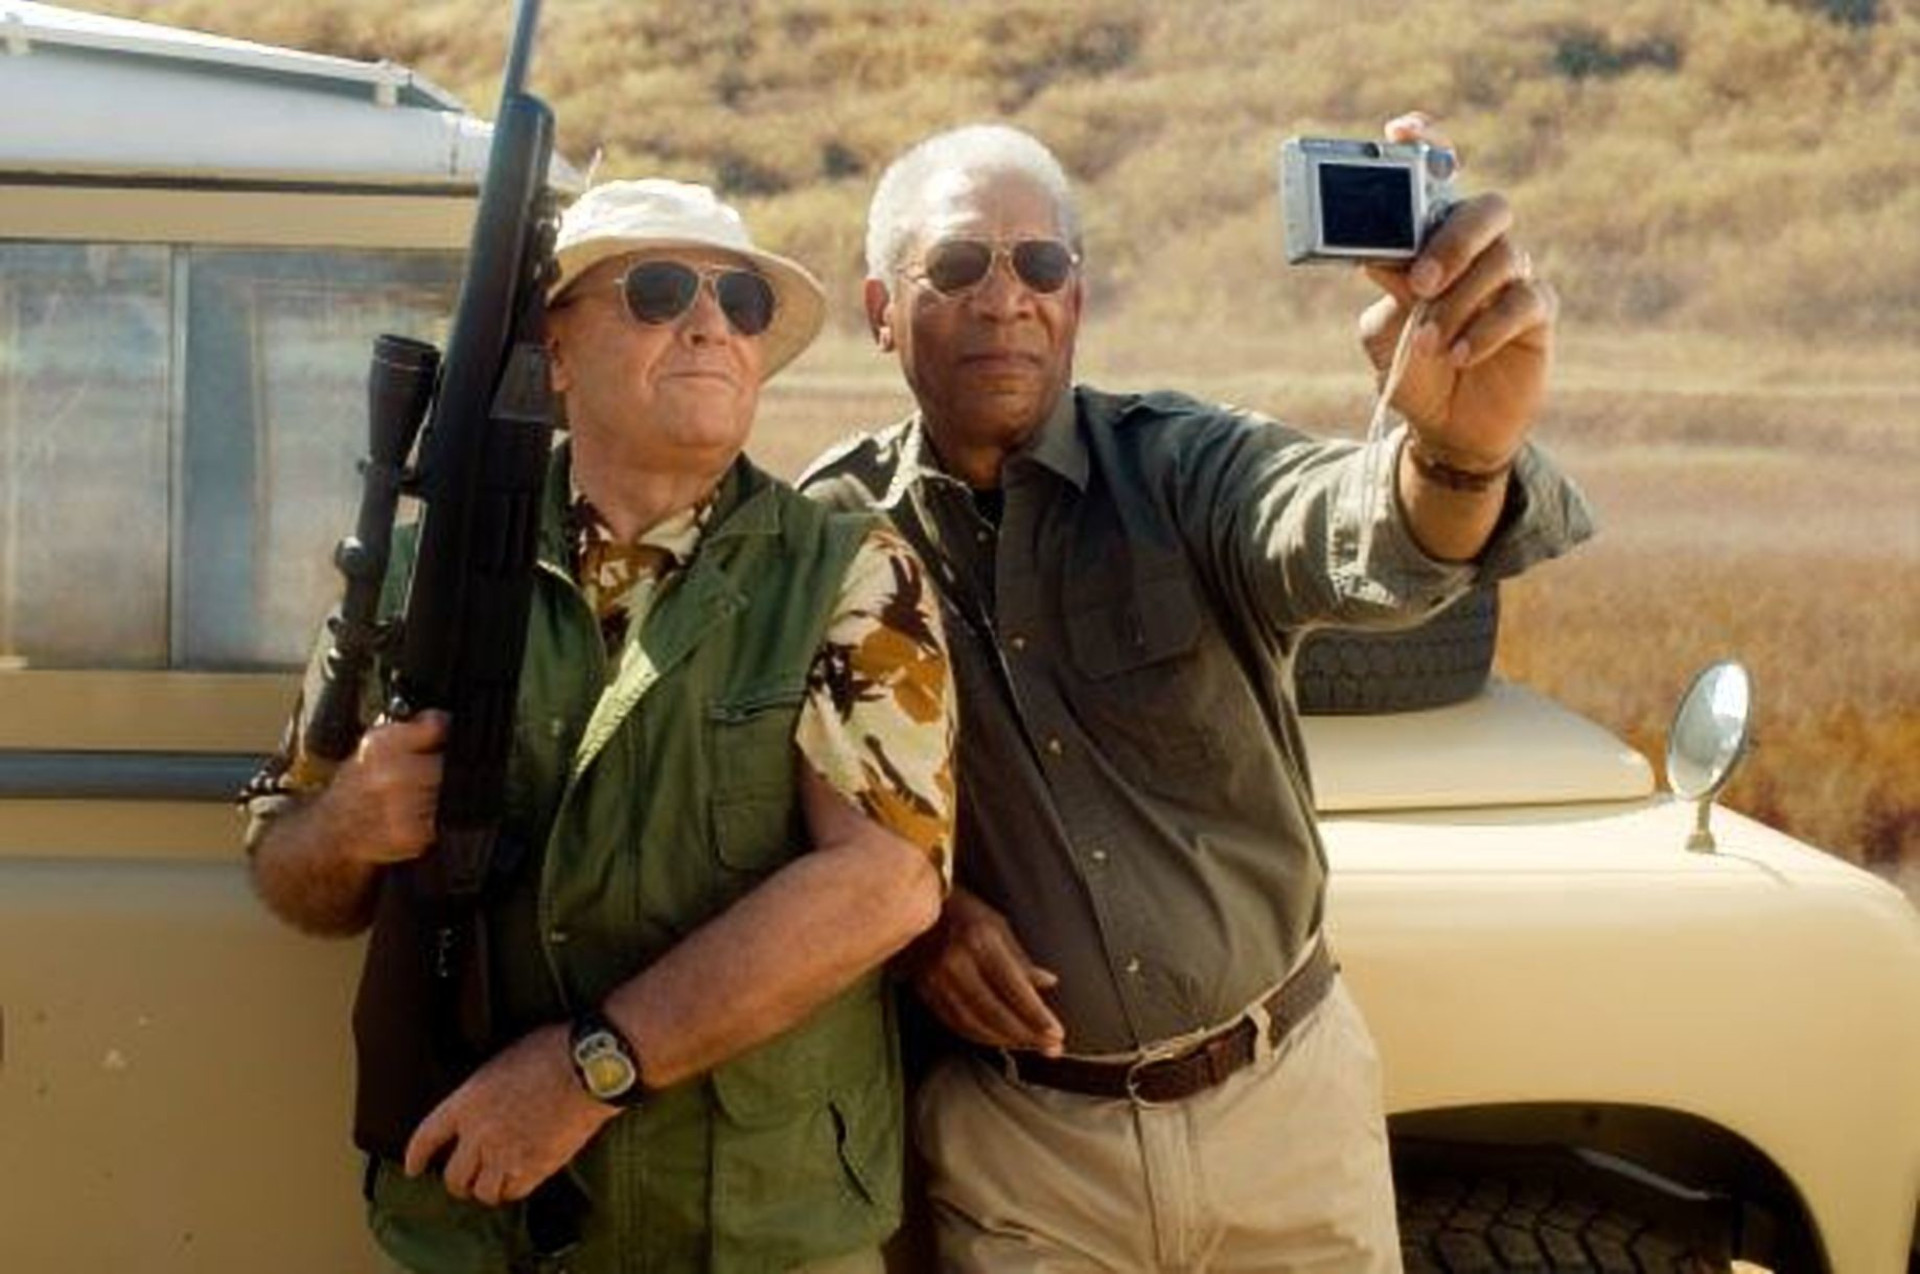 Morgan Freeman and Jack Nicholson set out to seek fulfillment at the end of their lives, proving that you’re never too old to travel.<p><a href="https://www.msn.com/en-us/community/channel/vid-7xx8mnucu55yw63we9va2gwr7uihbxwc68fxqp25x6tg4ftibpra?cvid=94631541bc0f4f89bfd59158d696ad7e">Follow us and access great exclusive content every day</a></p>